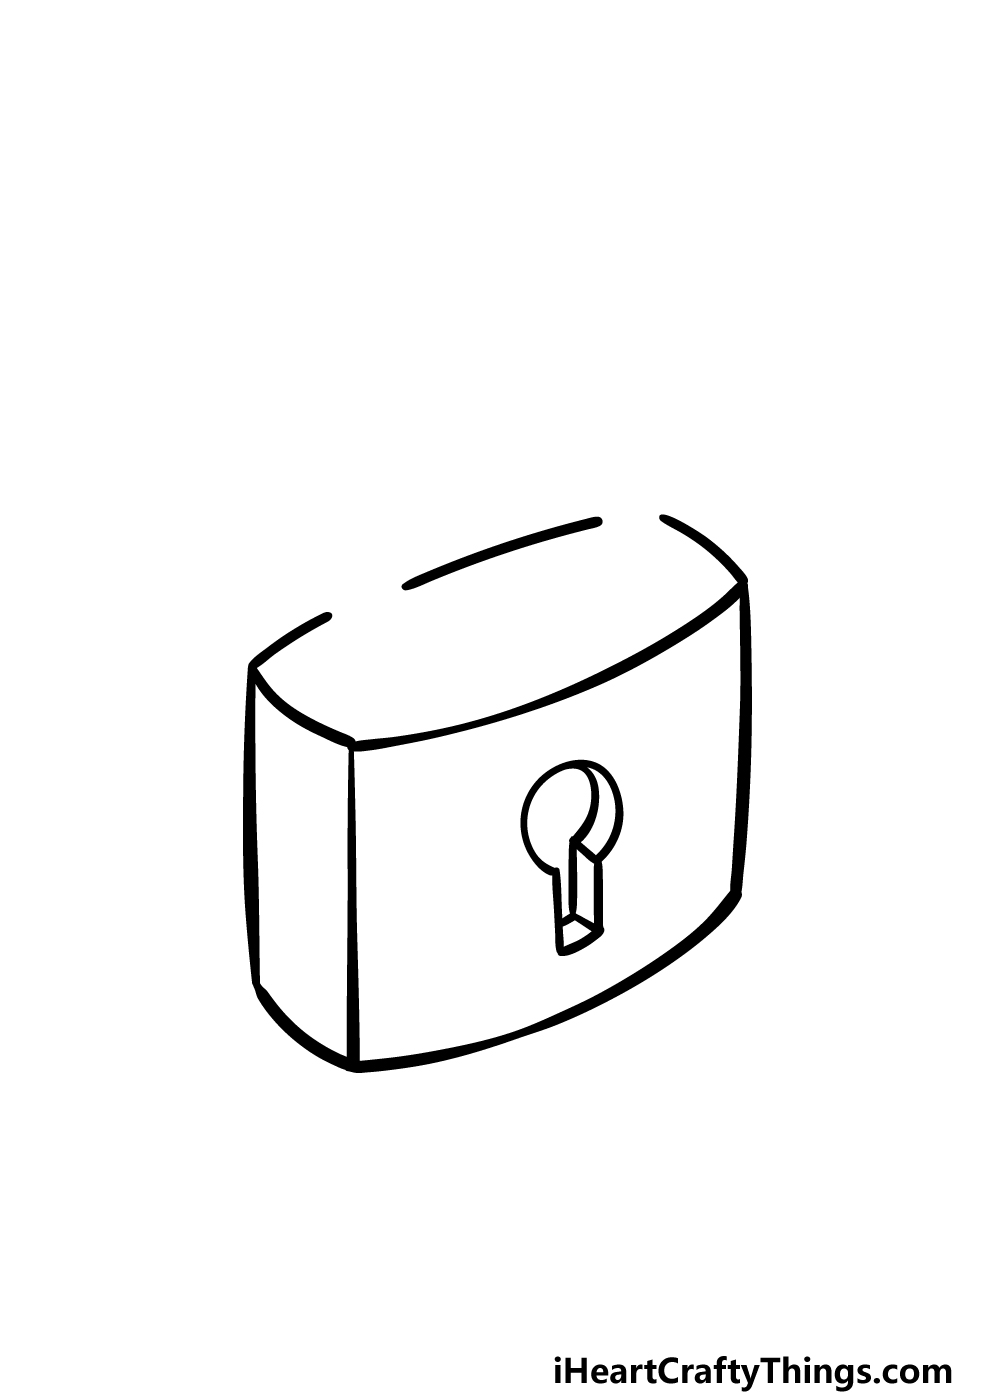 how to draw a Padlock step 3